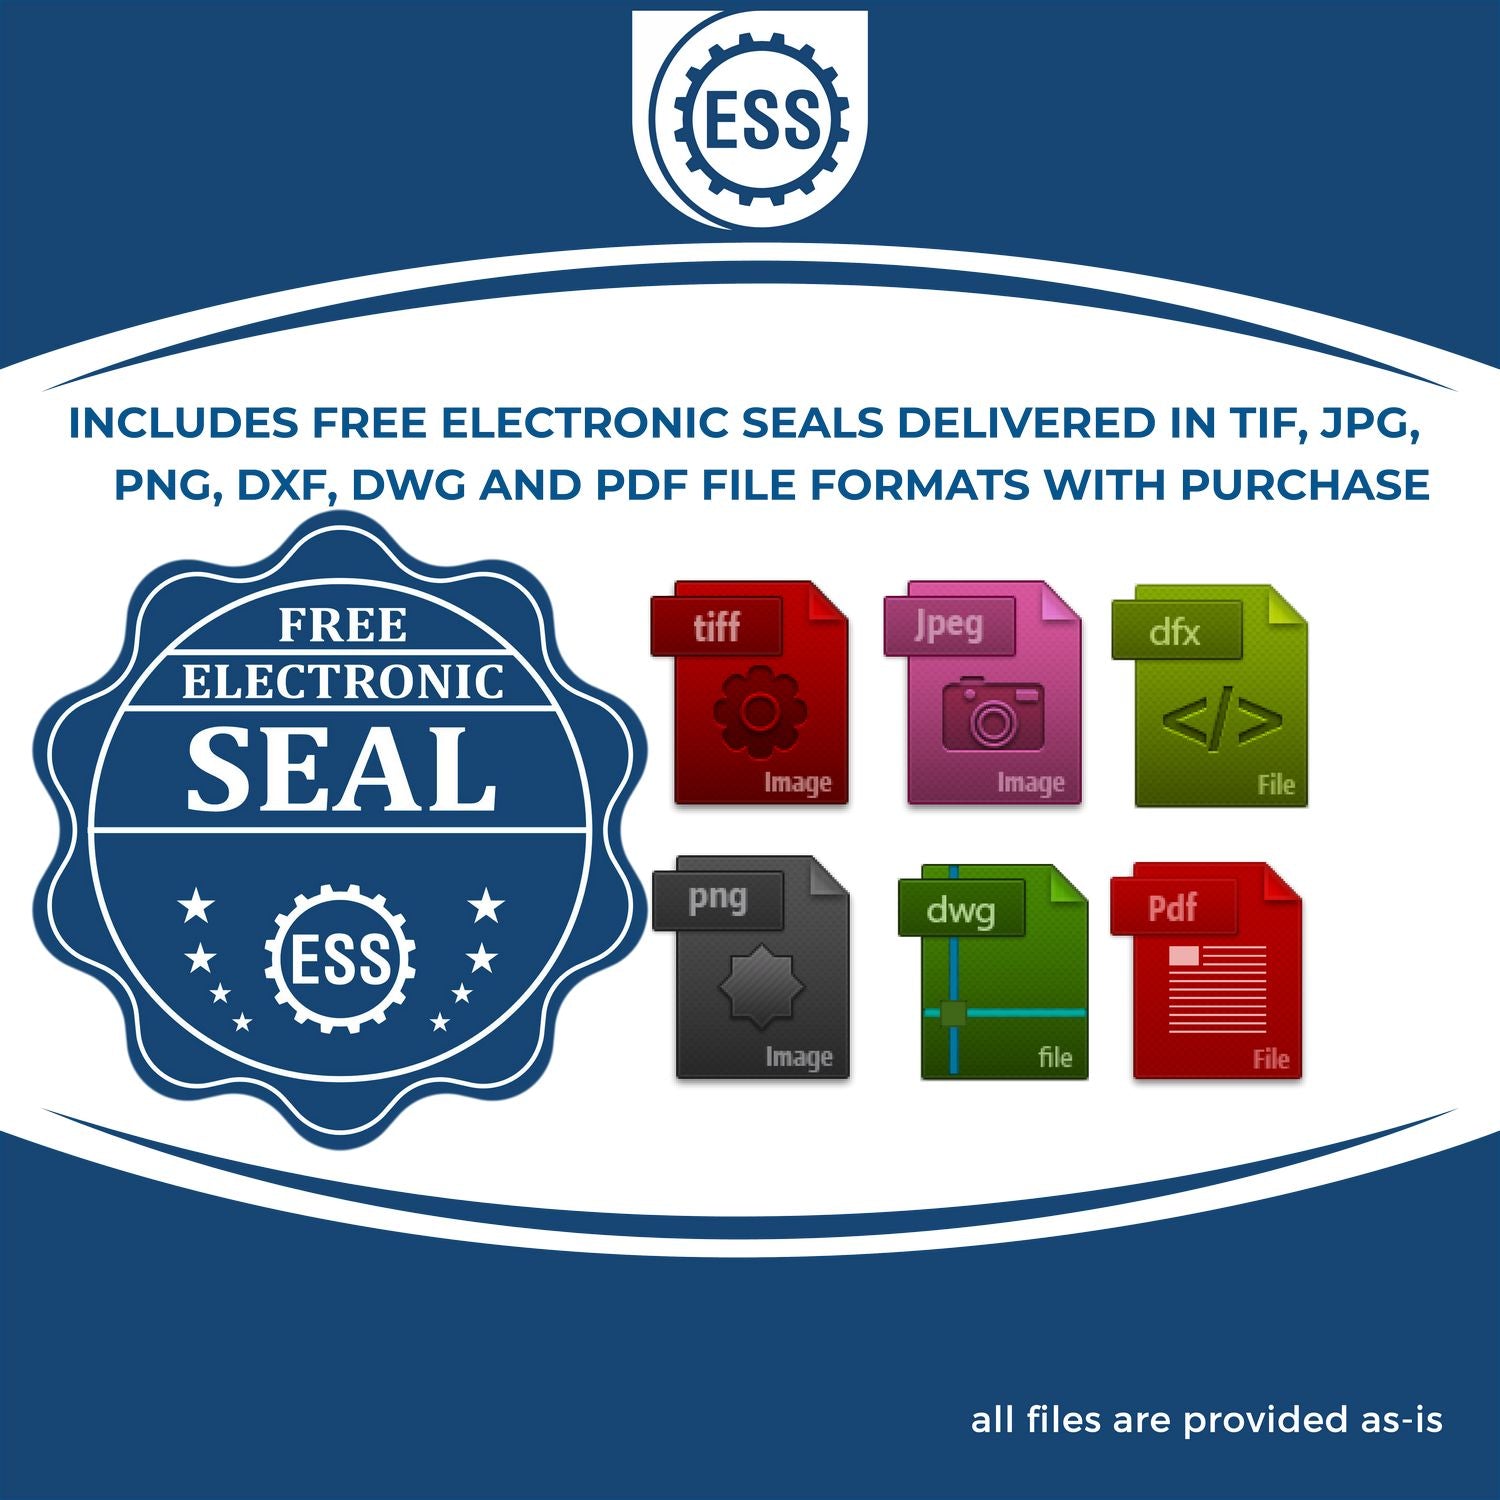 An infographic for the free electronic seal for the Premium MaxLight Pre-Inked Delaware Engineering Stamp illustrating the different file type icons such as DXF, DWG, TIF, JPG and PNG.